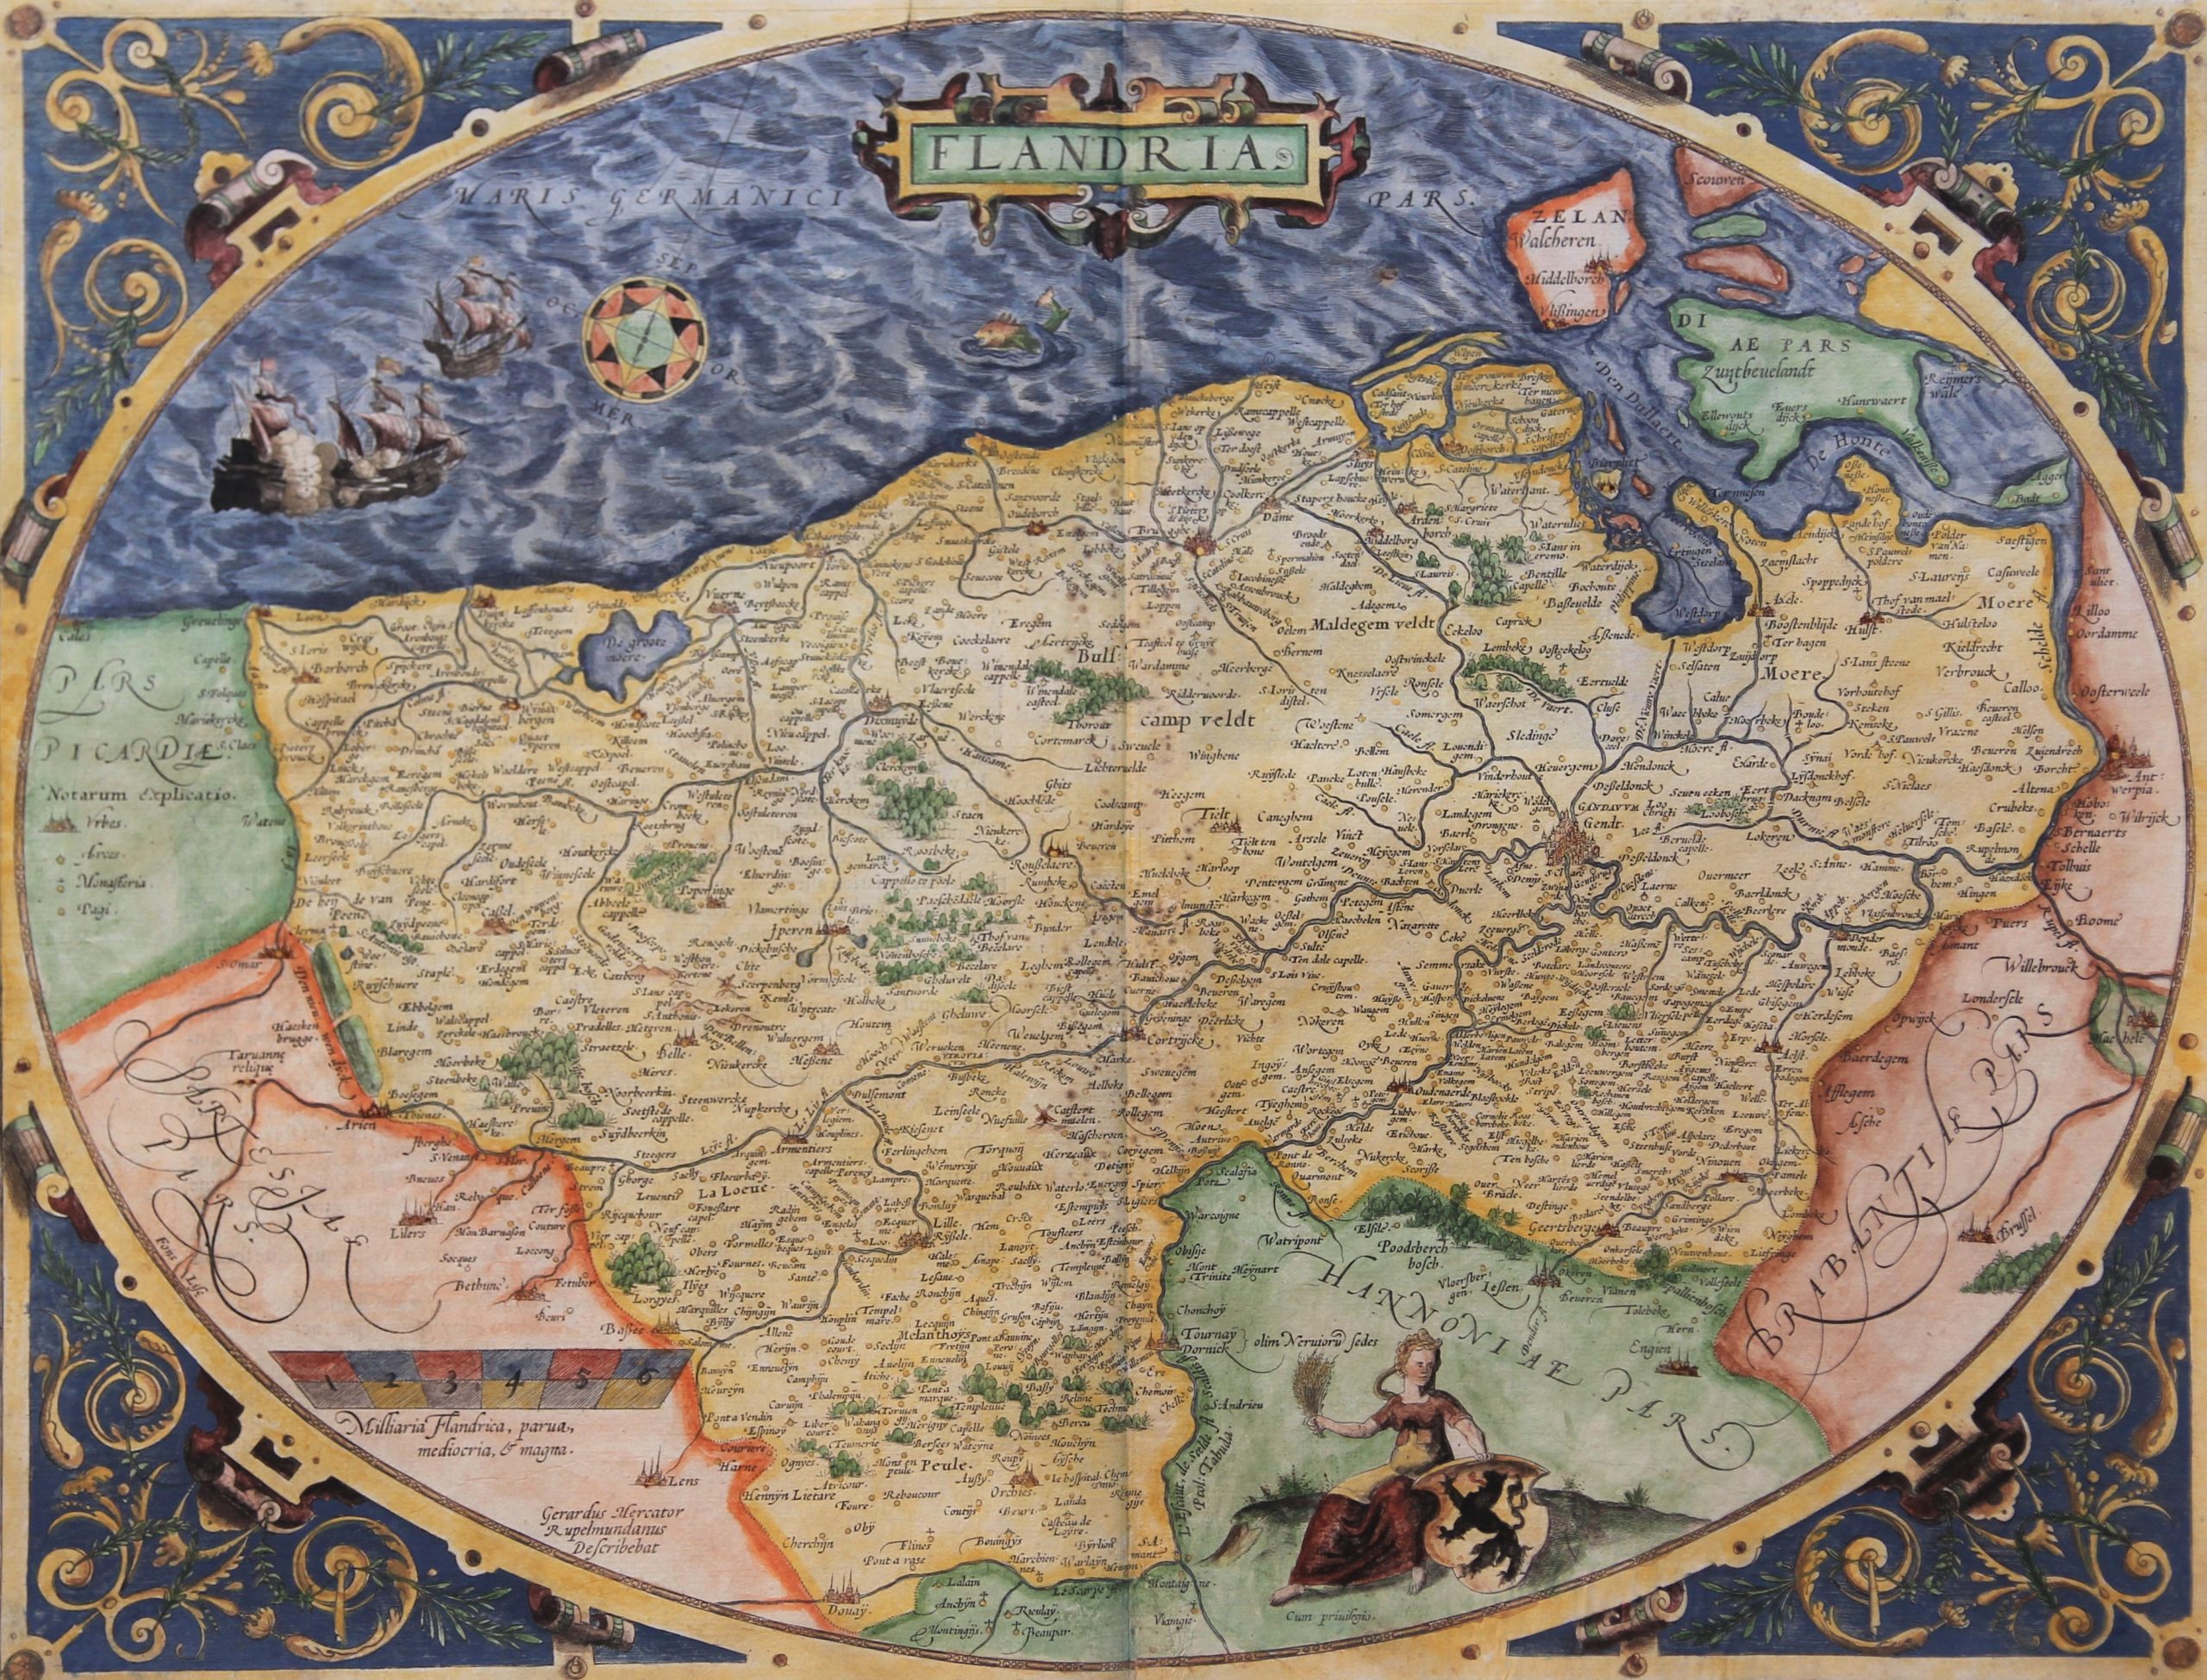 Old map of Flanders in egg form by Ortelius 1570